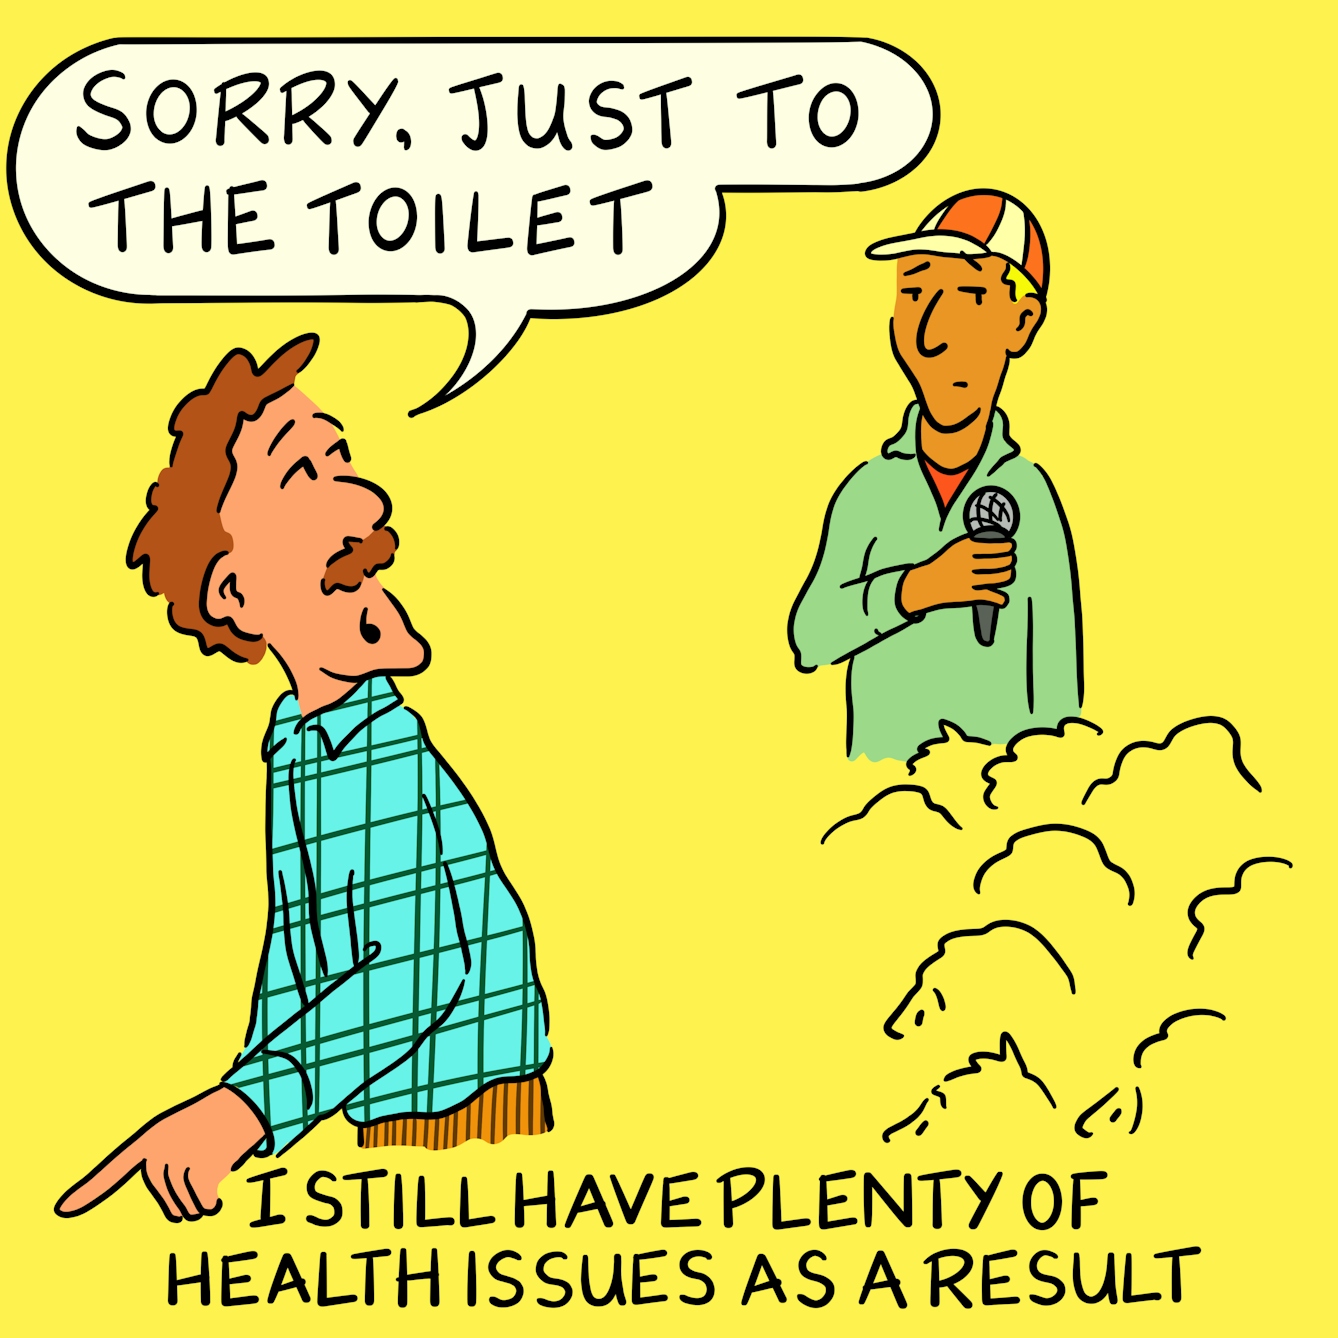 Panel 2 of a four-panel comic drawn digitally: a white man with a moustache, corduroy trousers and a plaid shirt, with the outline of seated heads around waist-height, looks back over his shoulder and says "Sorry, just to the toilet". A person wearing a baseball cap and holding a microphone looks unimpressed. The caption text reads "I still have plenty of health issues as a result"